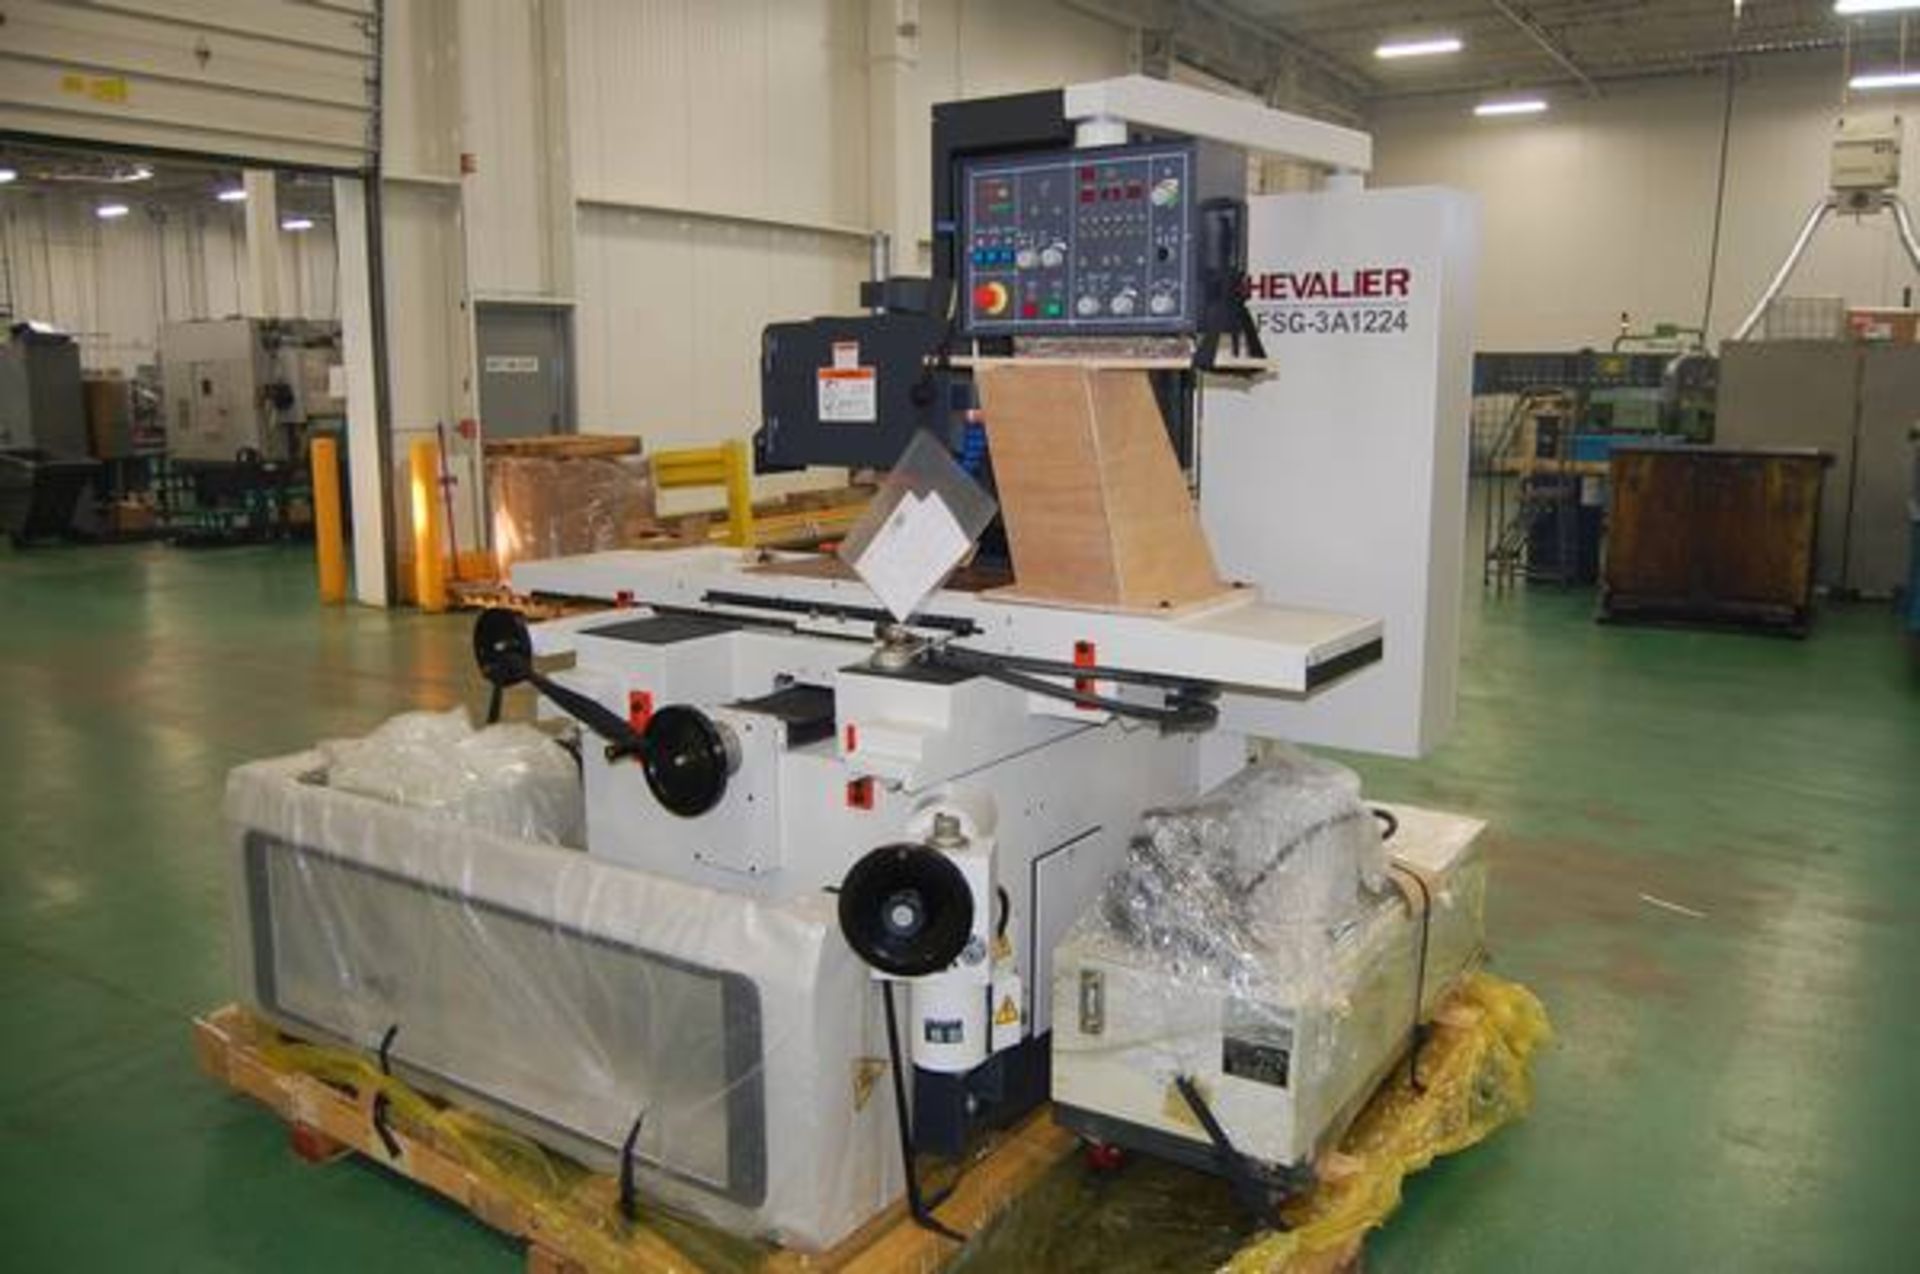 Chevalier Model FSG-3A1224 12" x 24" Hydraulic Automatic Surface Grinder; Serial Number: